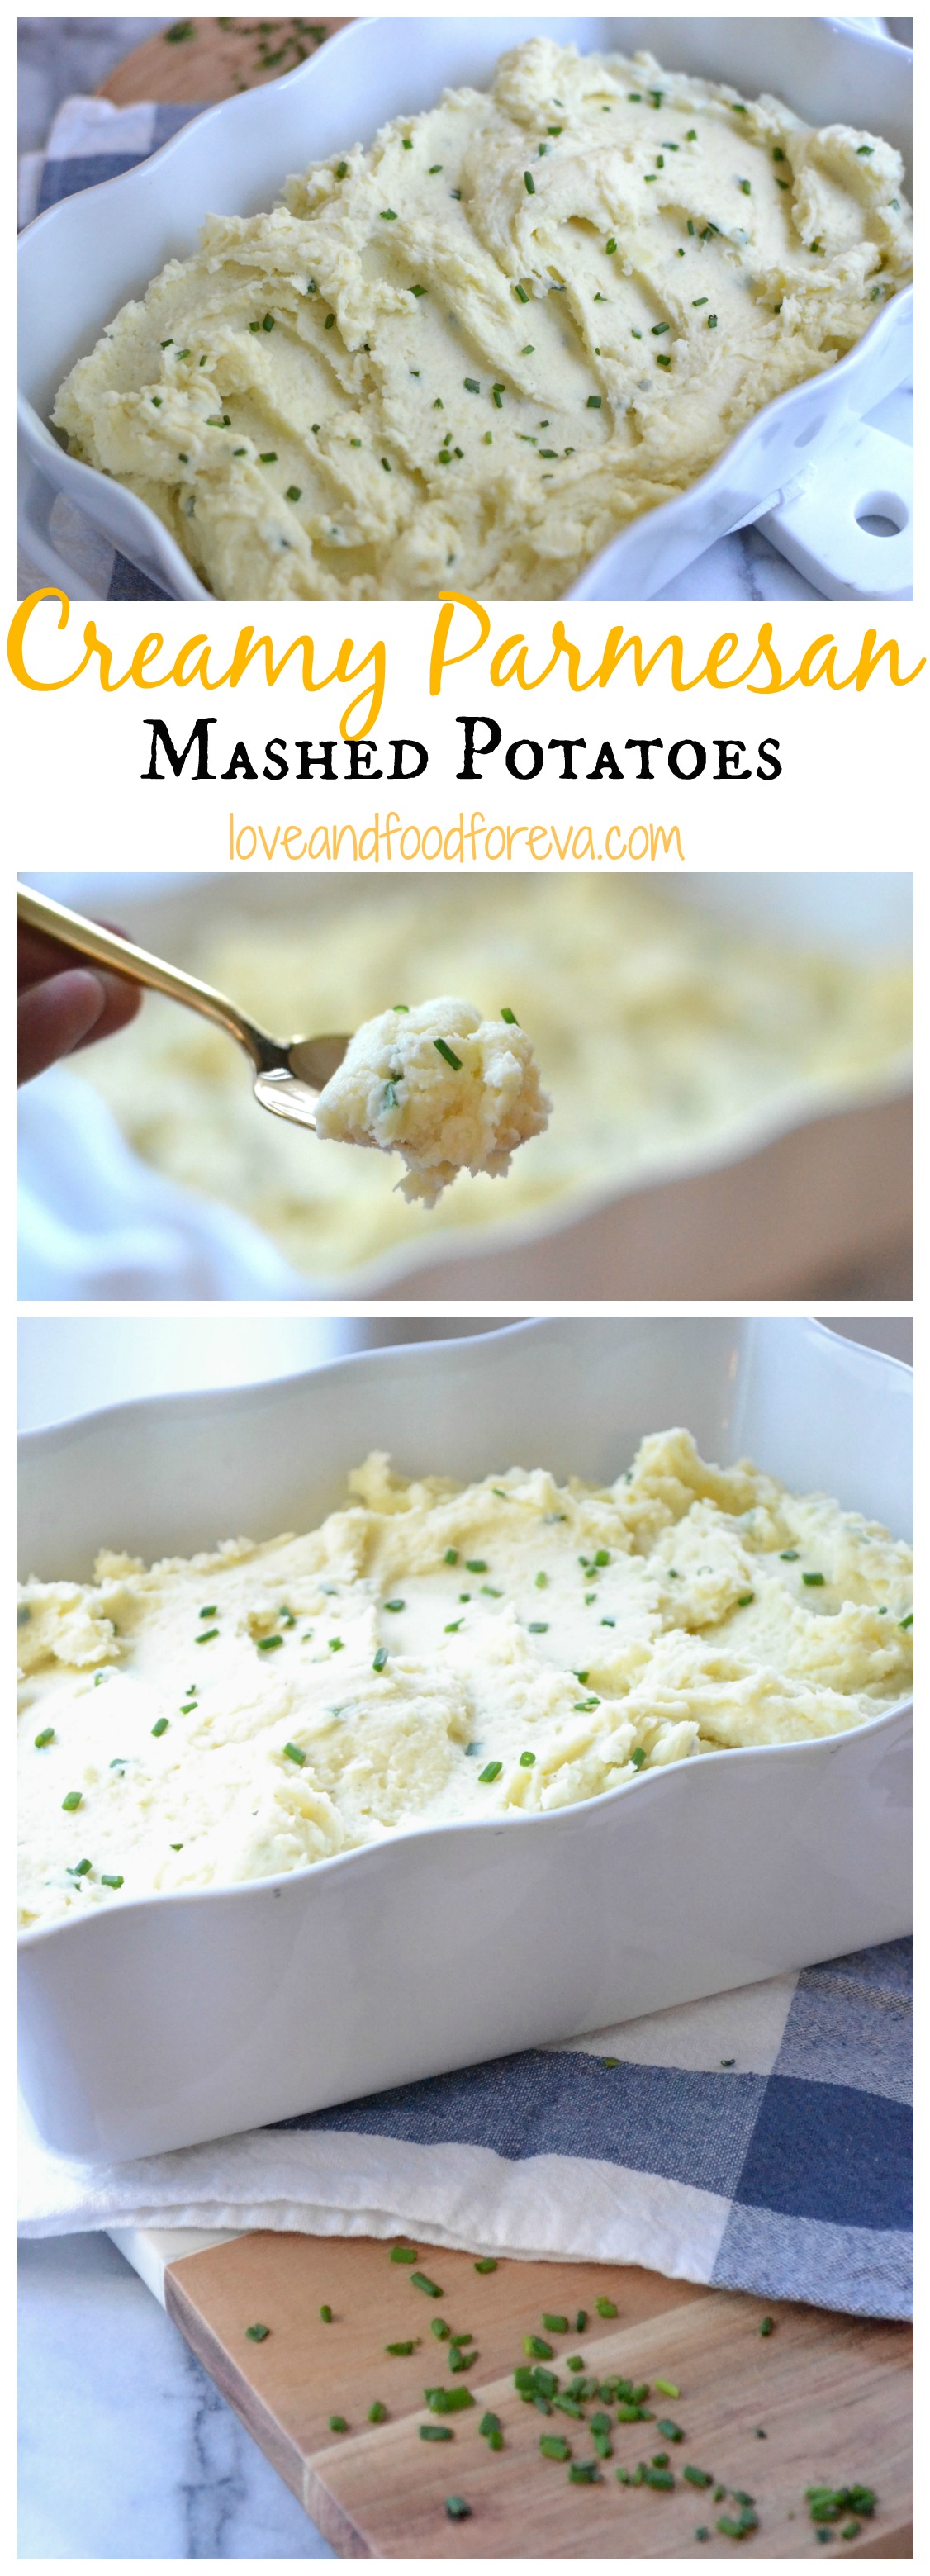 Creamy Parmesan Mashed Potatoes that will become everyone's favorite!